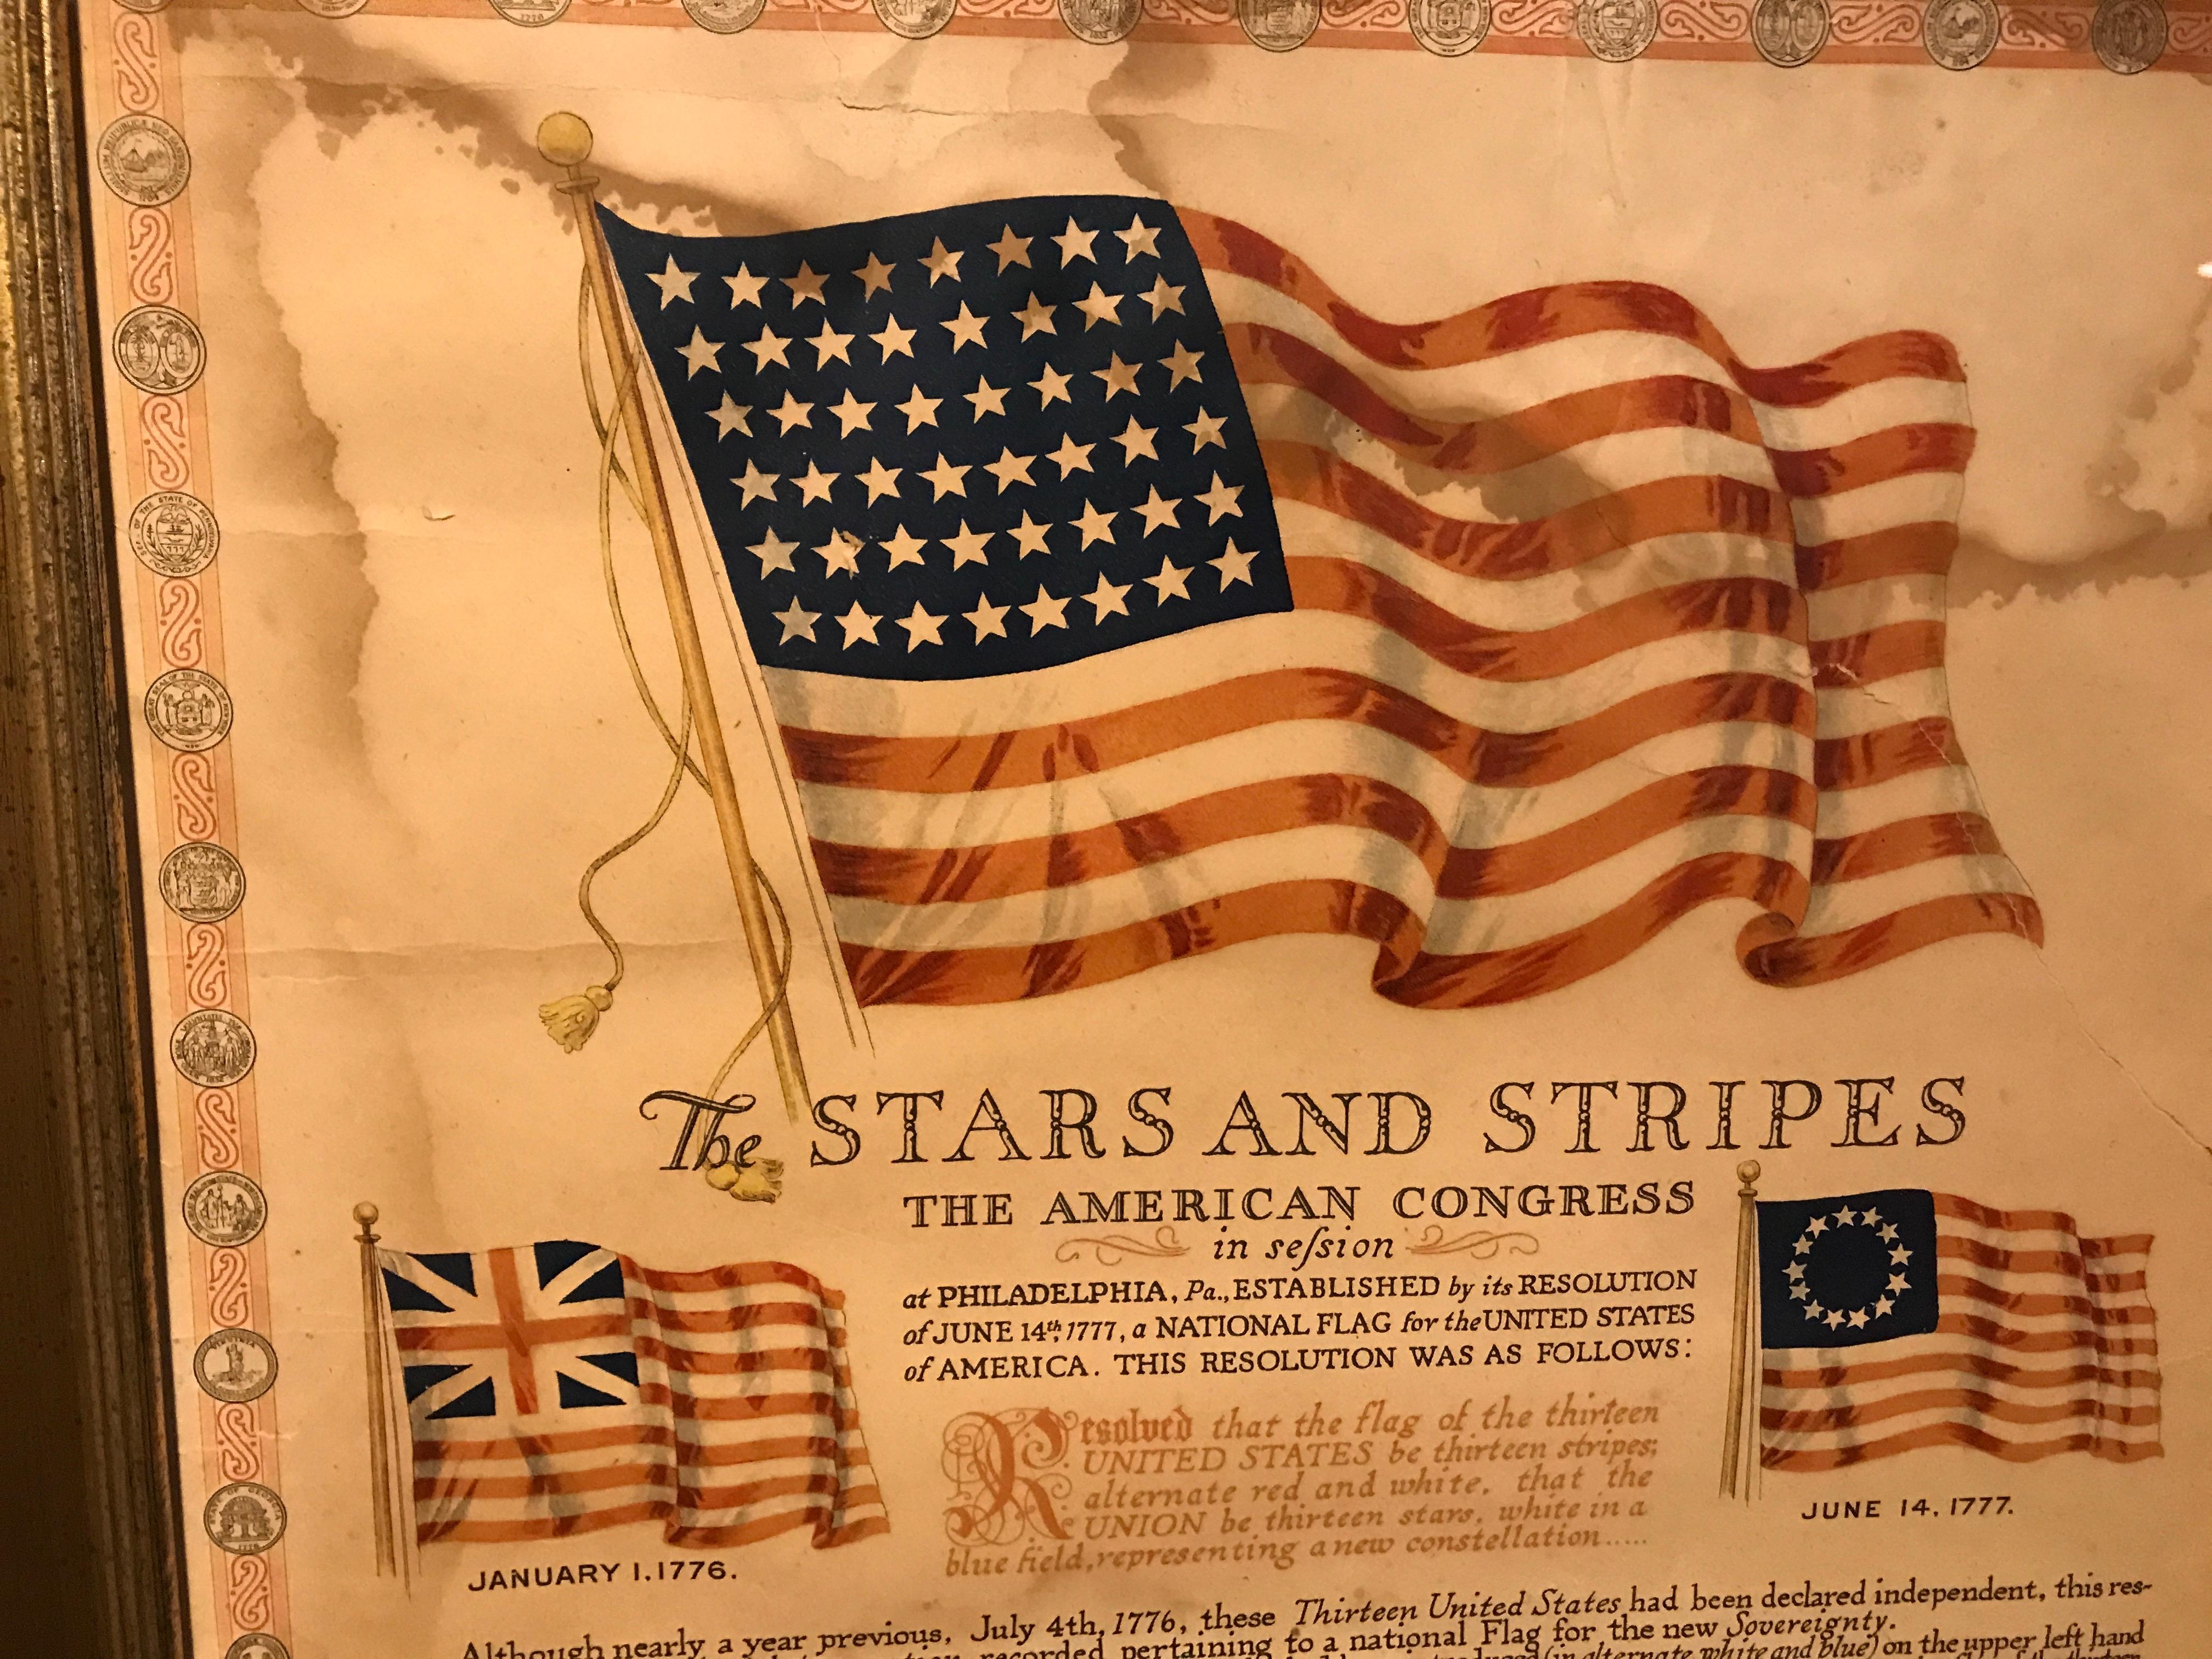 The Stars and Stripes circa 1917 by: Geo D.Roper, Rockford, IL. Evolution of the United States flag up until the 48 star flag. Flags included: January 1, 1776 (Grand Union Flag), June 14th 1777 (13 Stars), January 13th, 1794 (15 Stars), March 24th,